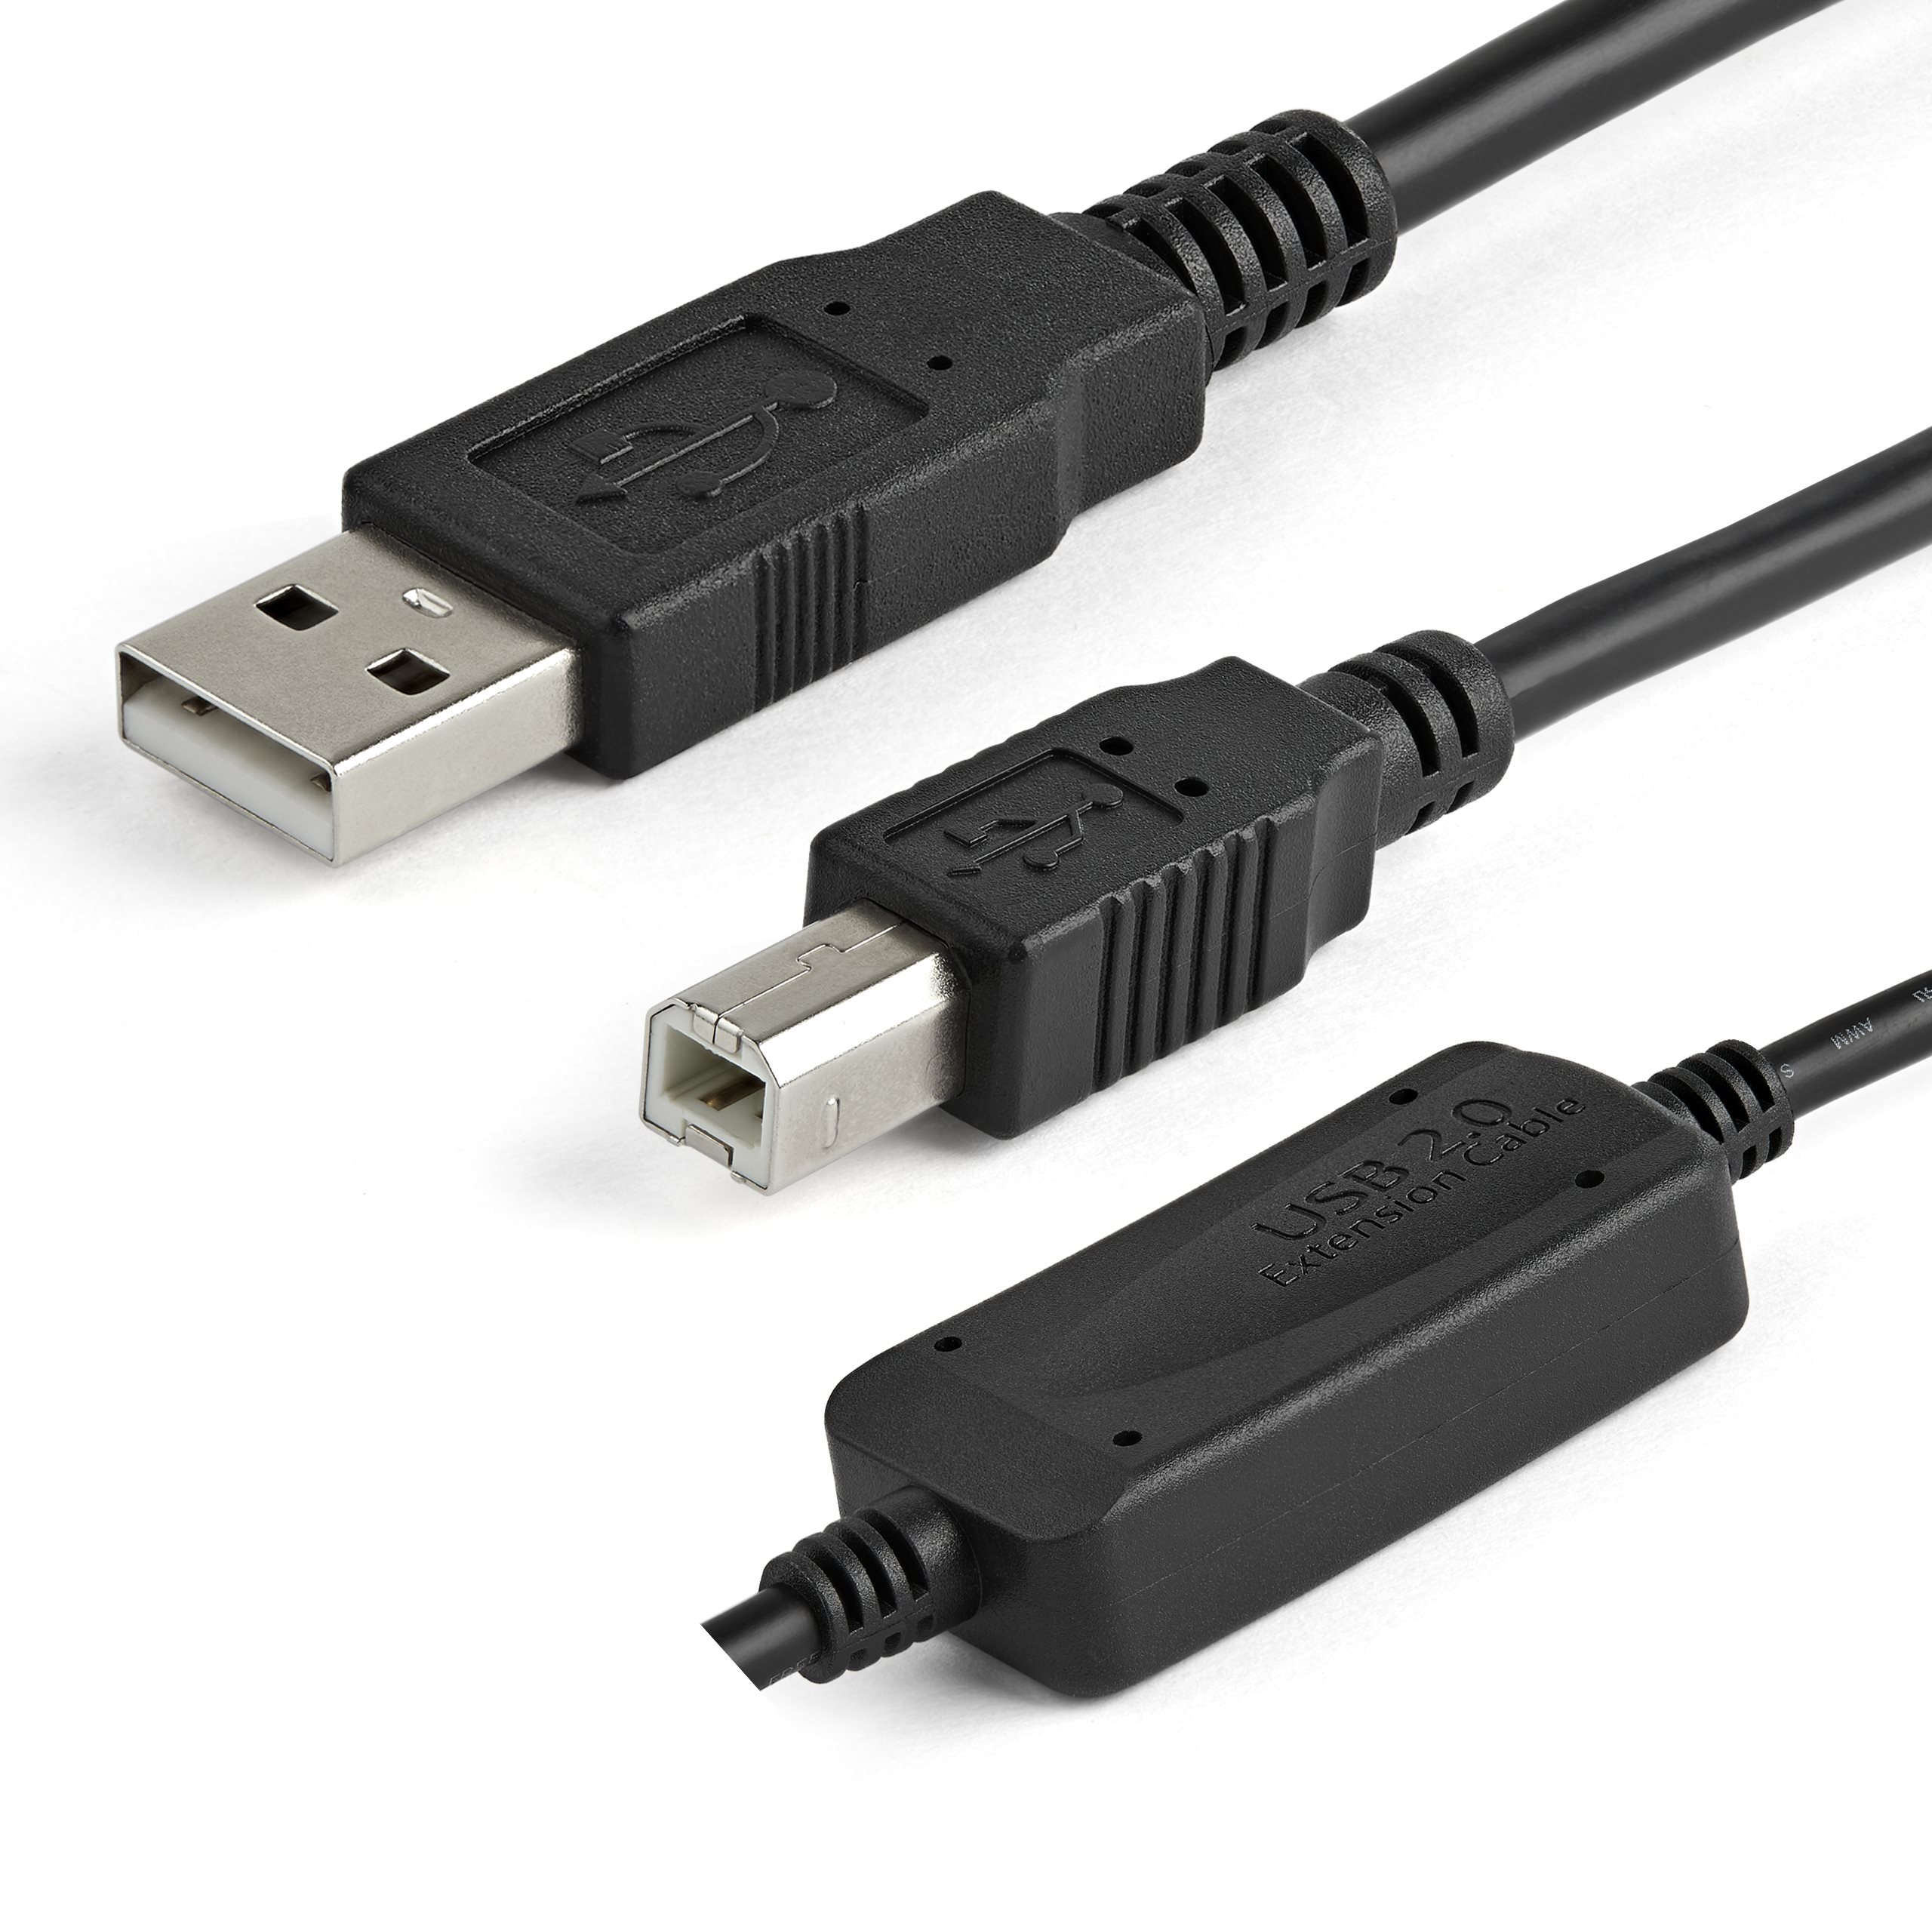 Cable - Active USB 2.0 A to B 9m / 30ft - USB 2.0 Cables